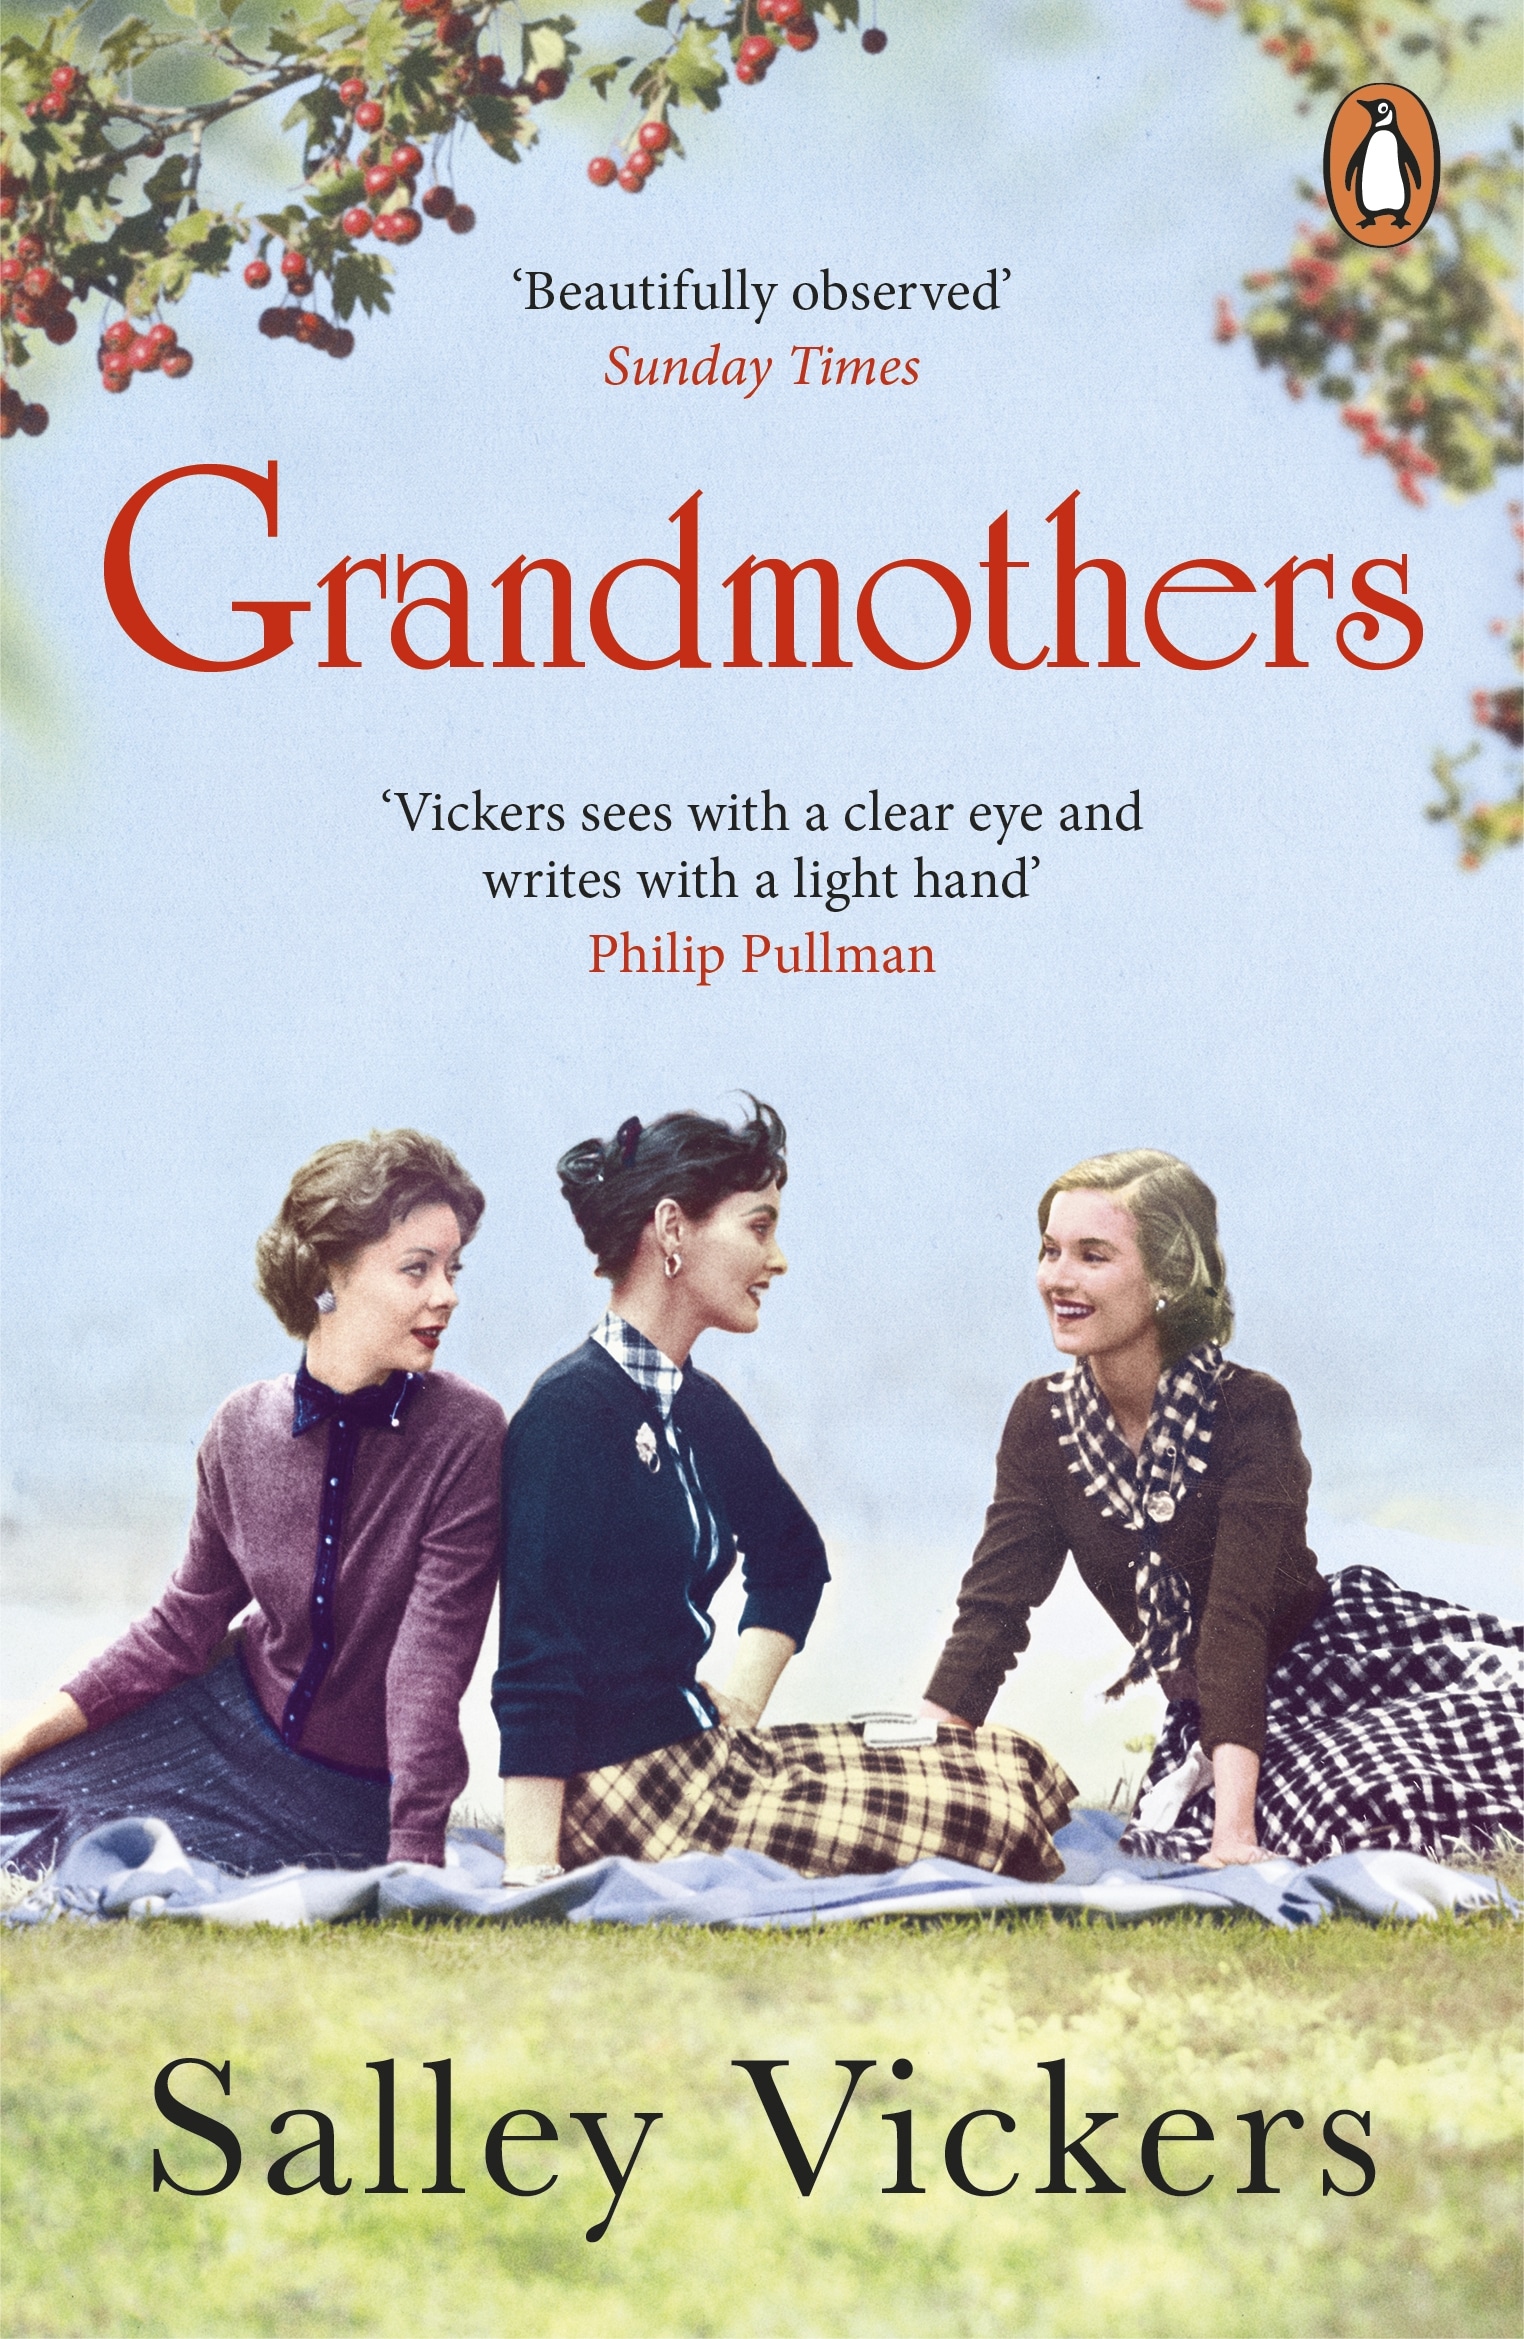 Book “Grandmothers” by Salley Vickers — September 3, 2020